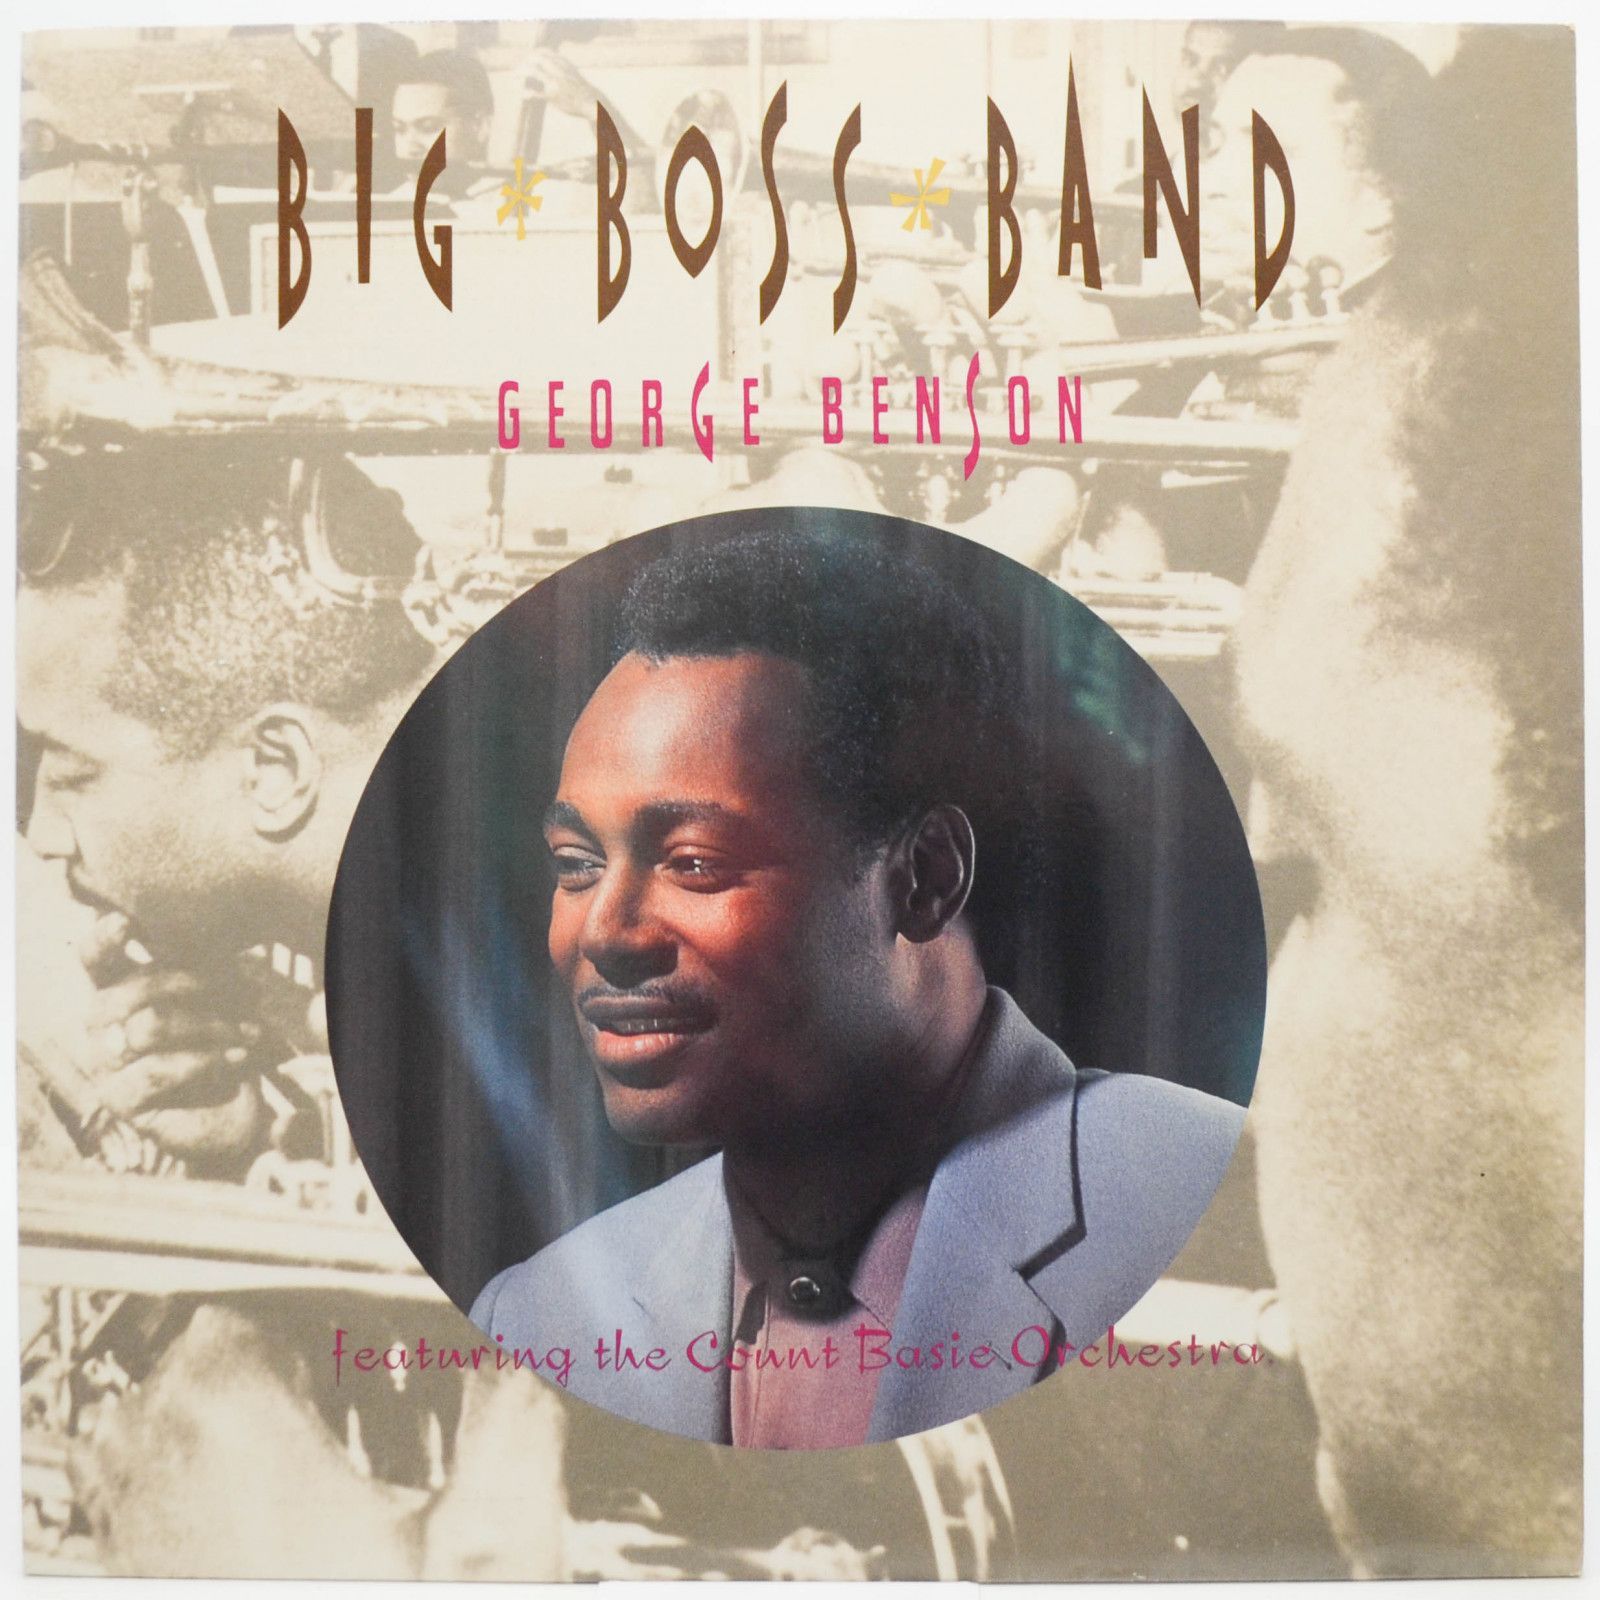 George Benson Featuring The Count Basie Orchestra — Big Boss Band, 1990